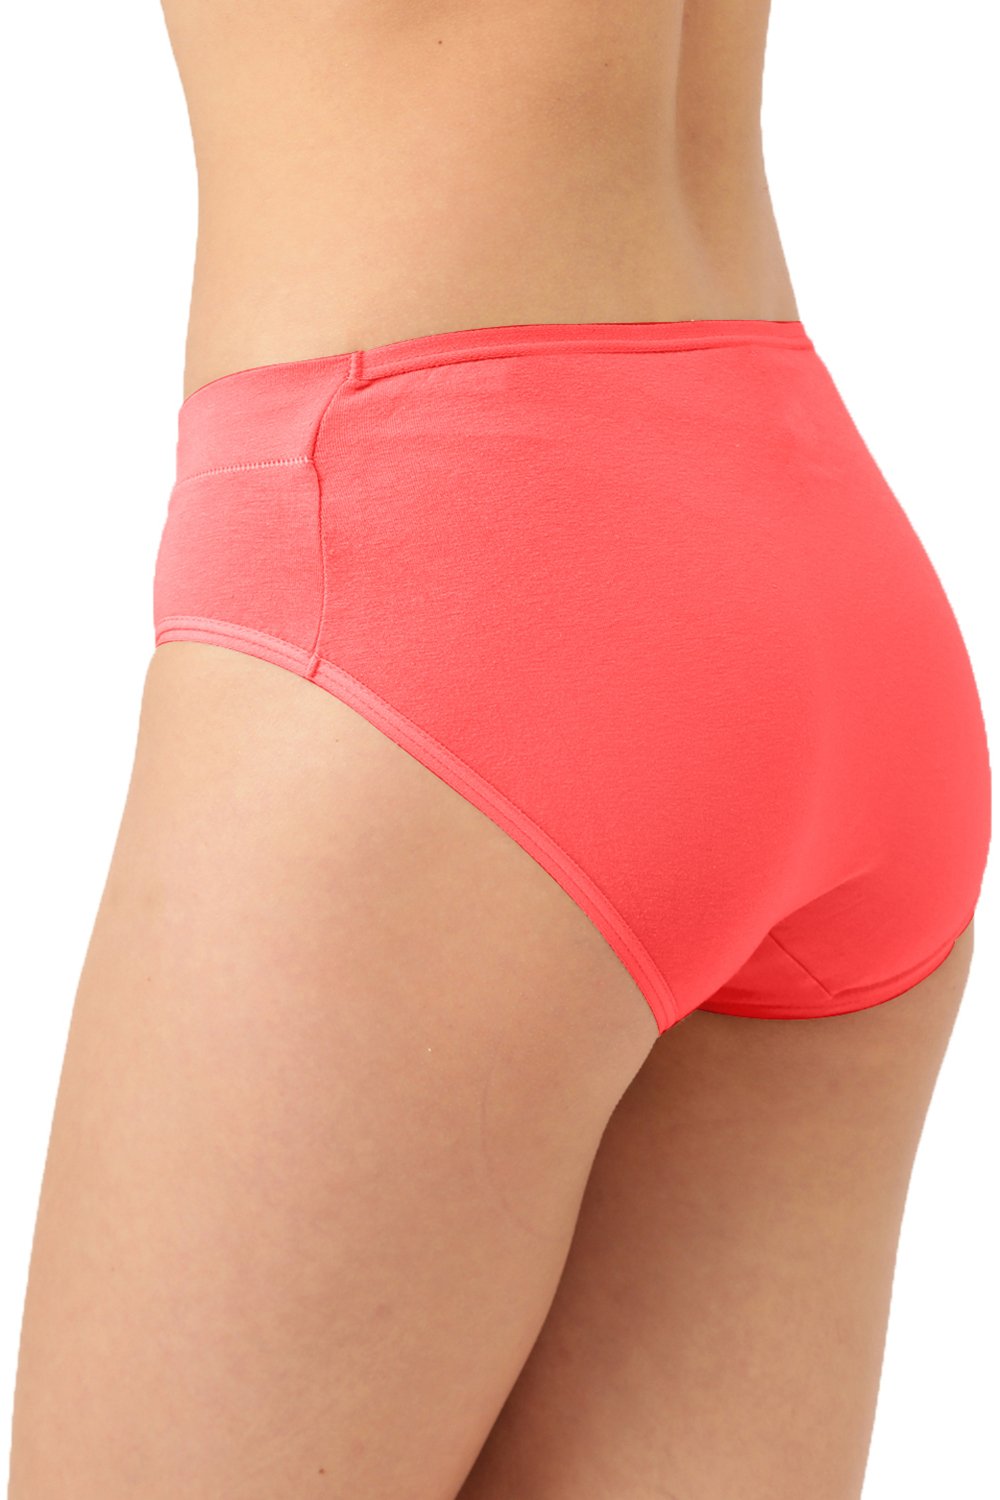 Organic Cotton Antimicrobial Maternity Panty-IMP102-Bright Pink_Bright Pink